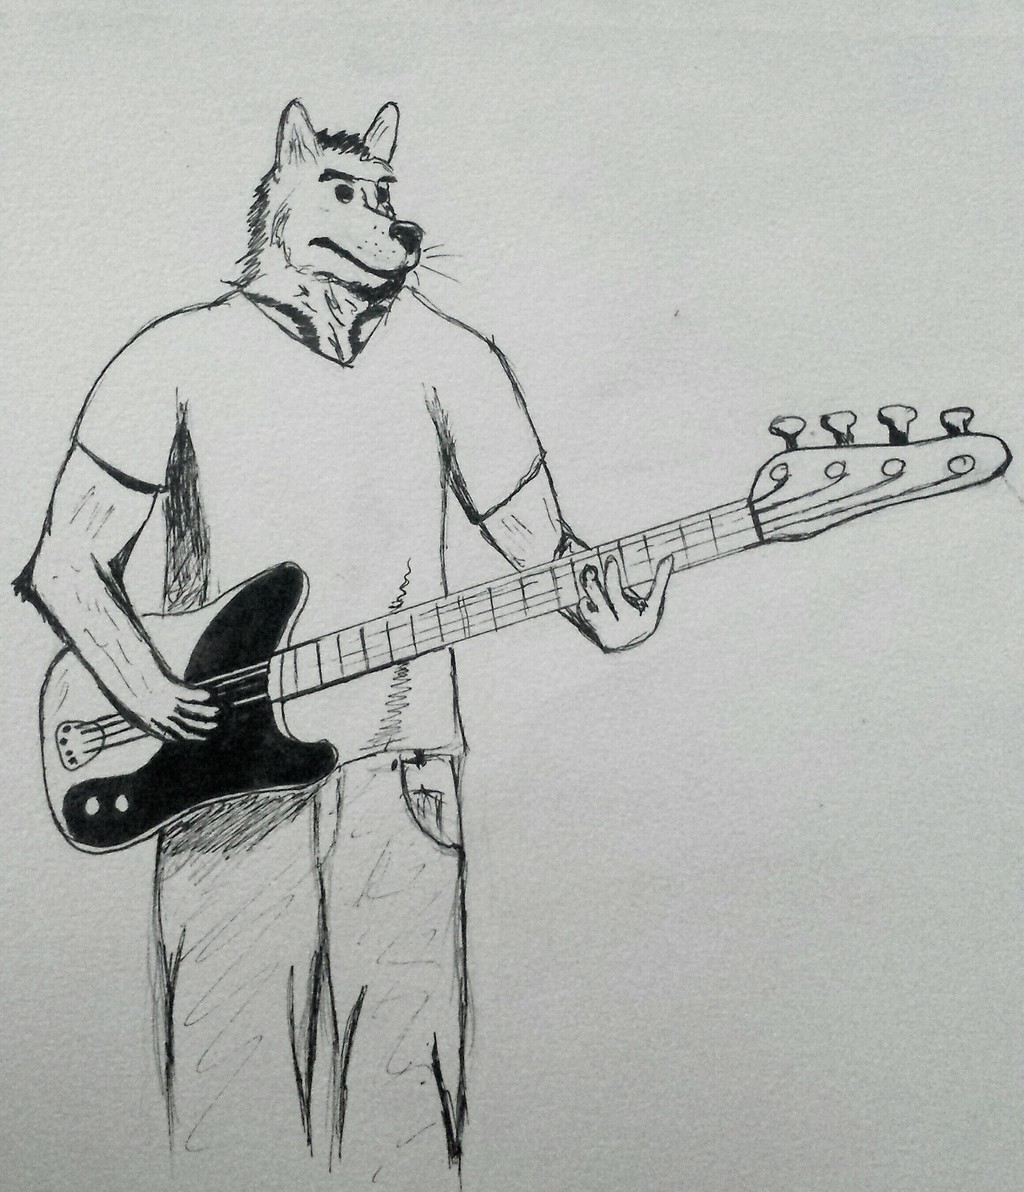 Most recent image: Furry Plays the Blues